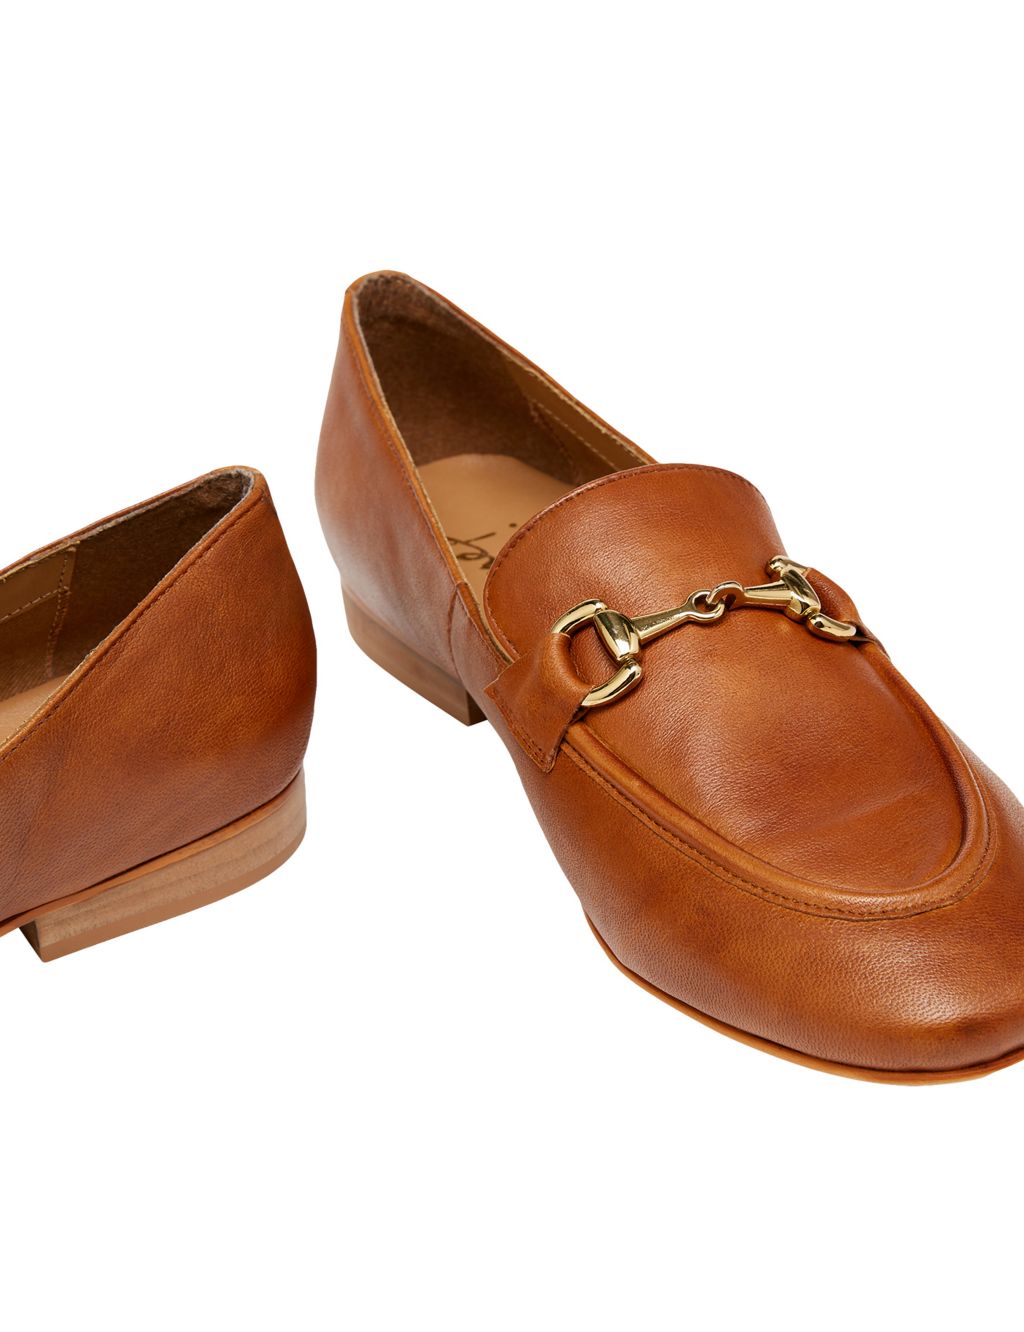 Leather Bar Flat Loafers image 3